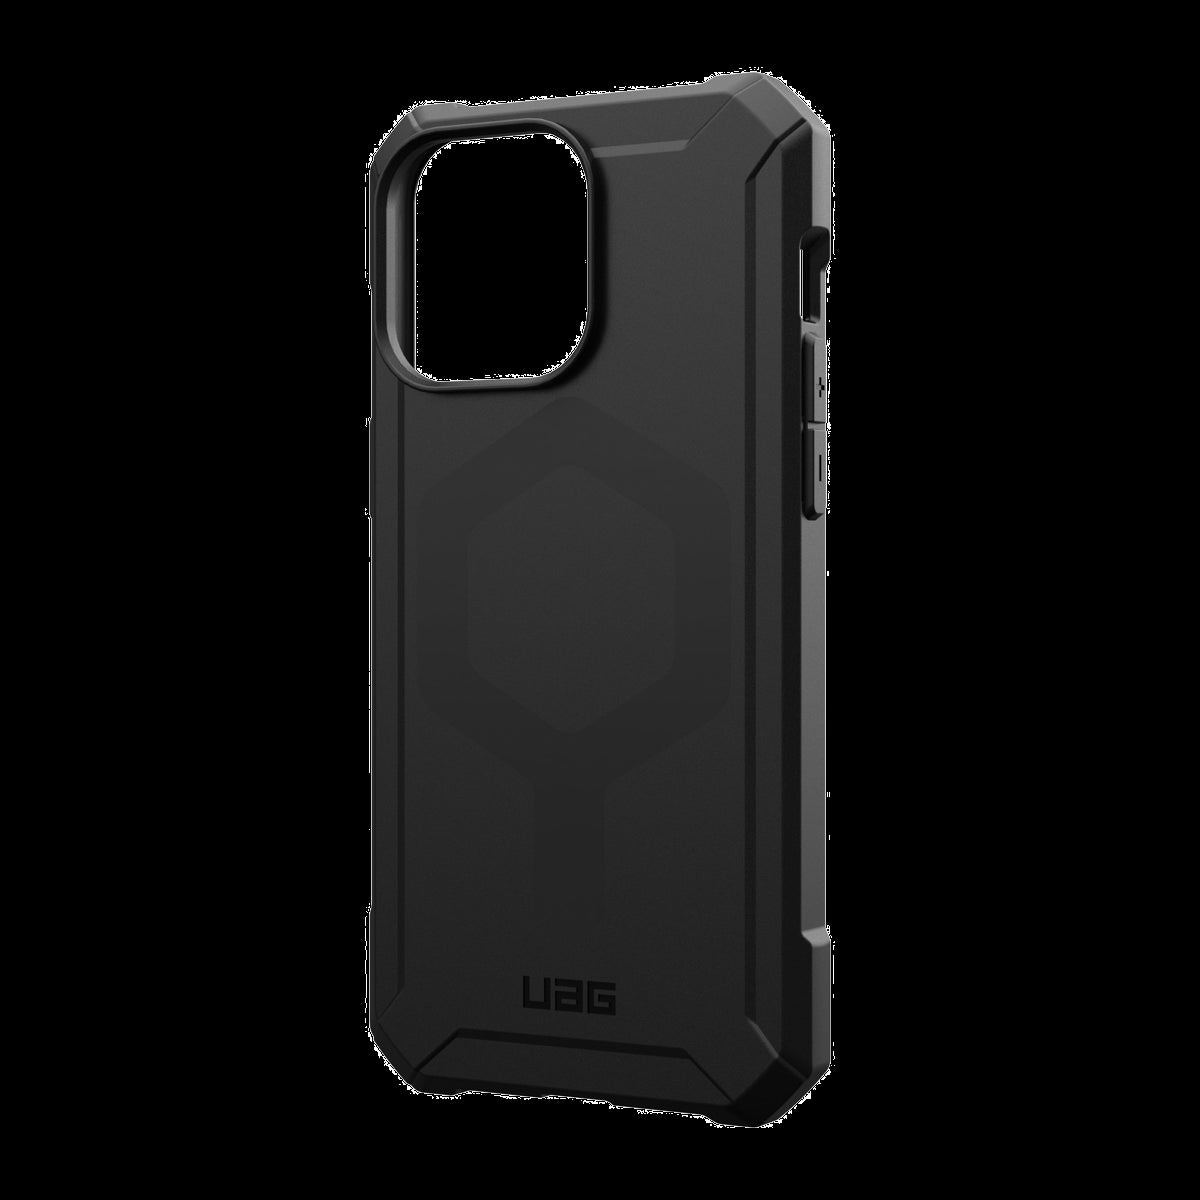 Get uncompromised defense with UAG Essential Armor – a one-piece TPU case featuring an ultra-thin design, 12 ft drop protection and is compatible with MagSafe charging.